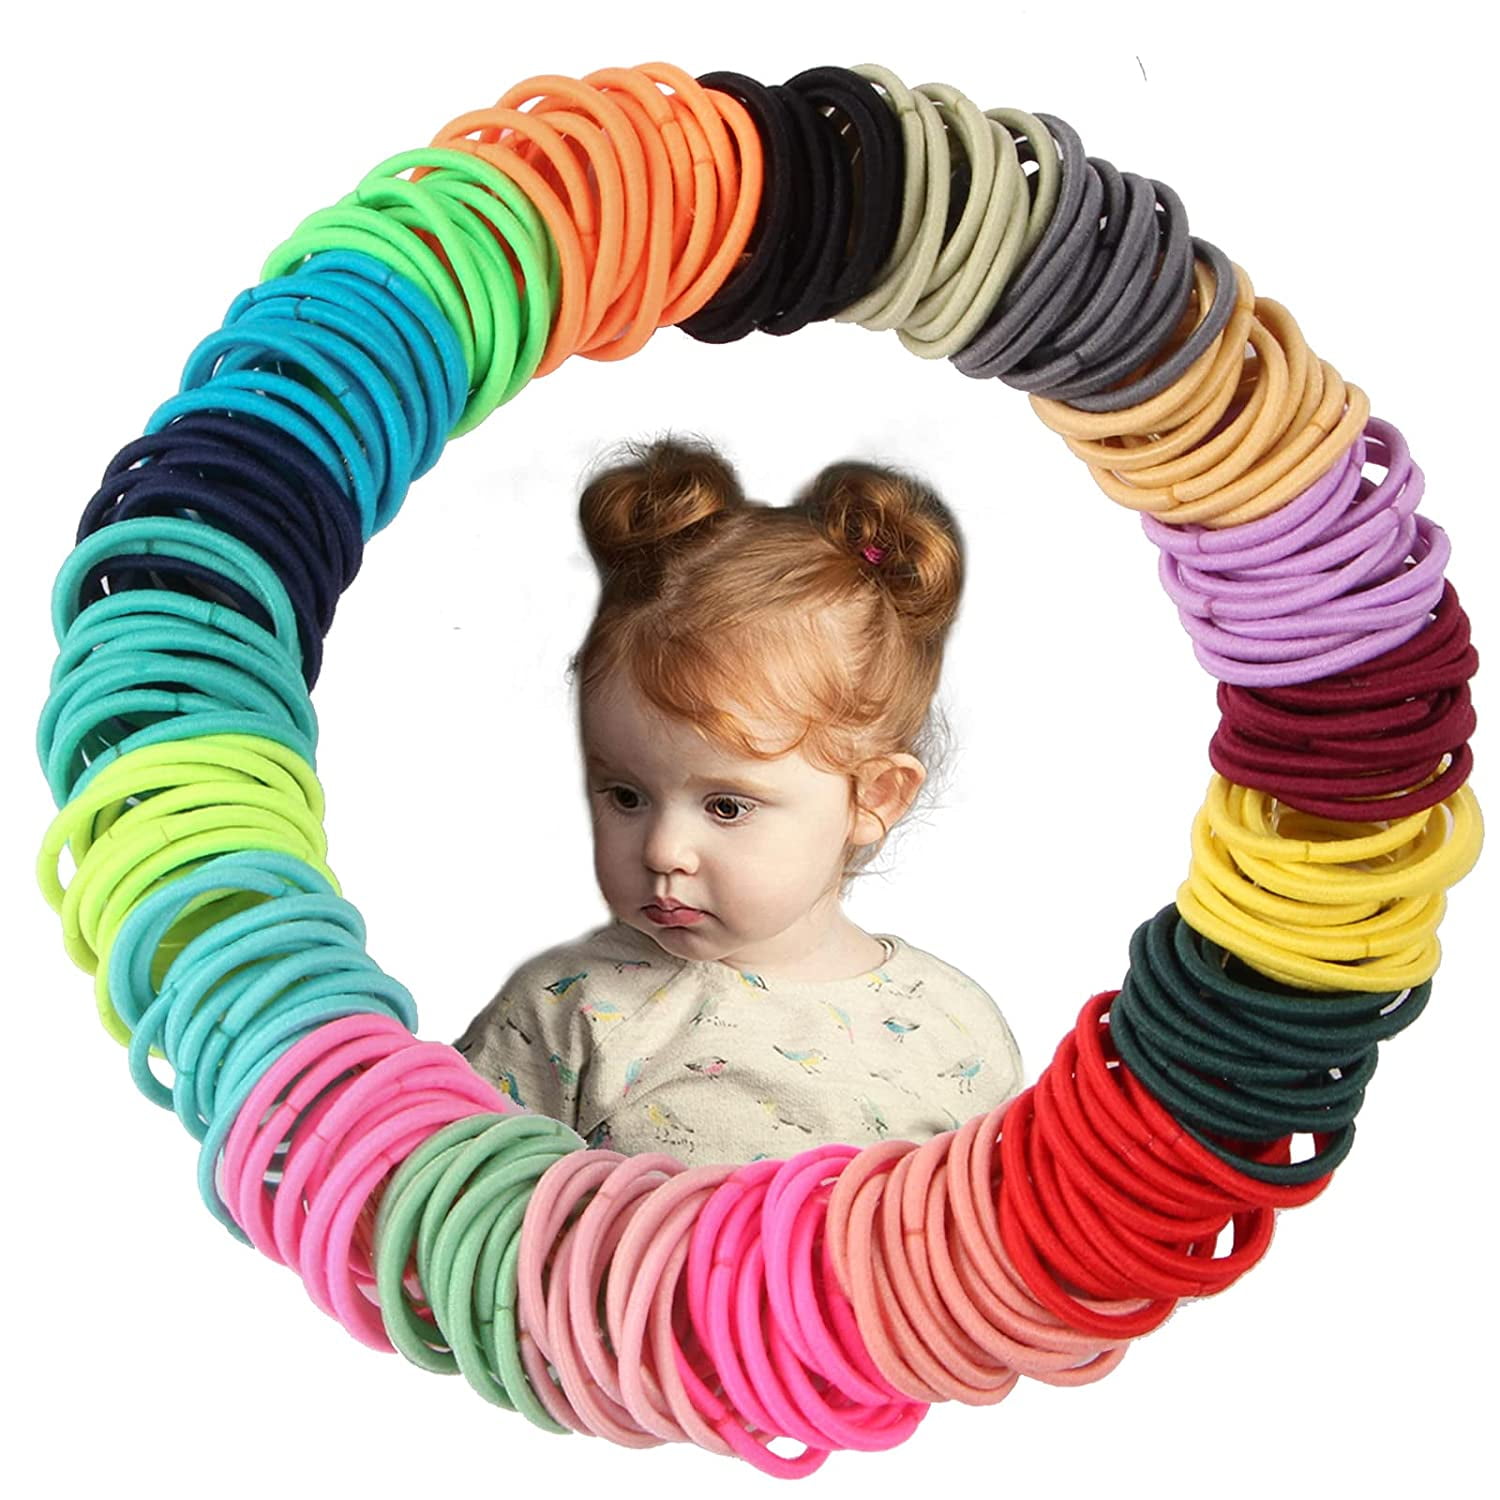 Hair Ties No Damage For Girls 100pcs Mini Hair Tie Small Colorful Hair Ties  Hair Accessories For Girls Hair Elastics Hair Rubber Bands For Hair Band